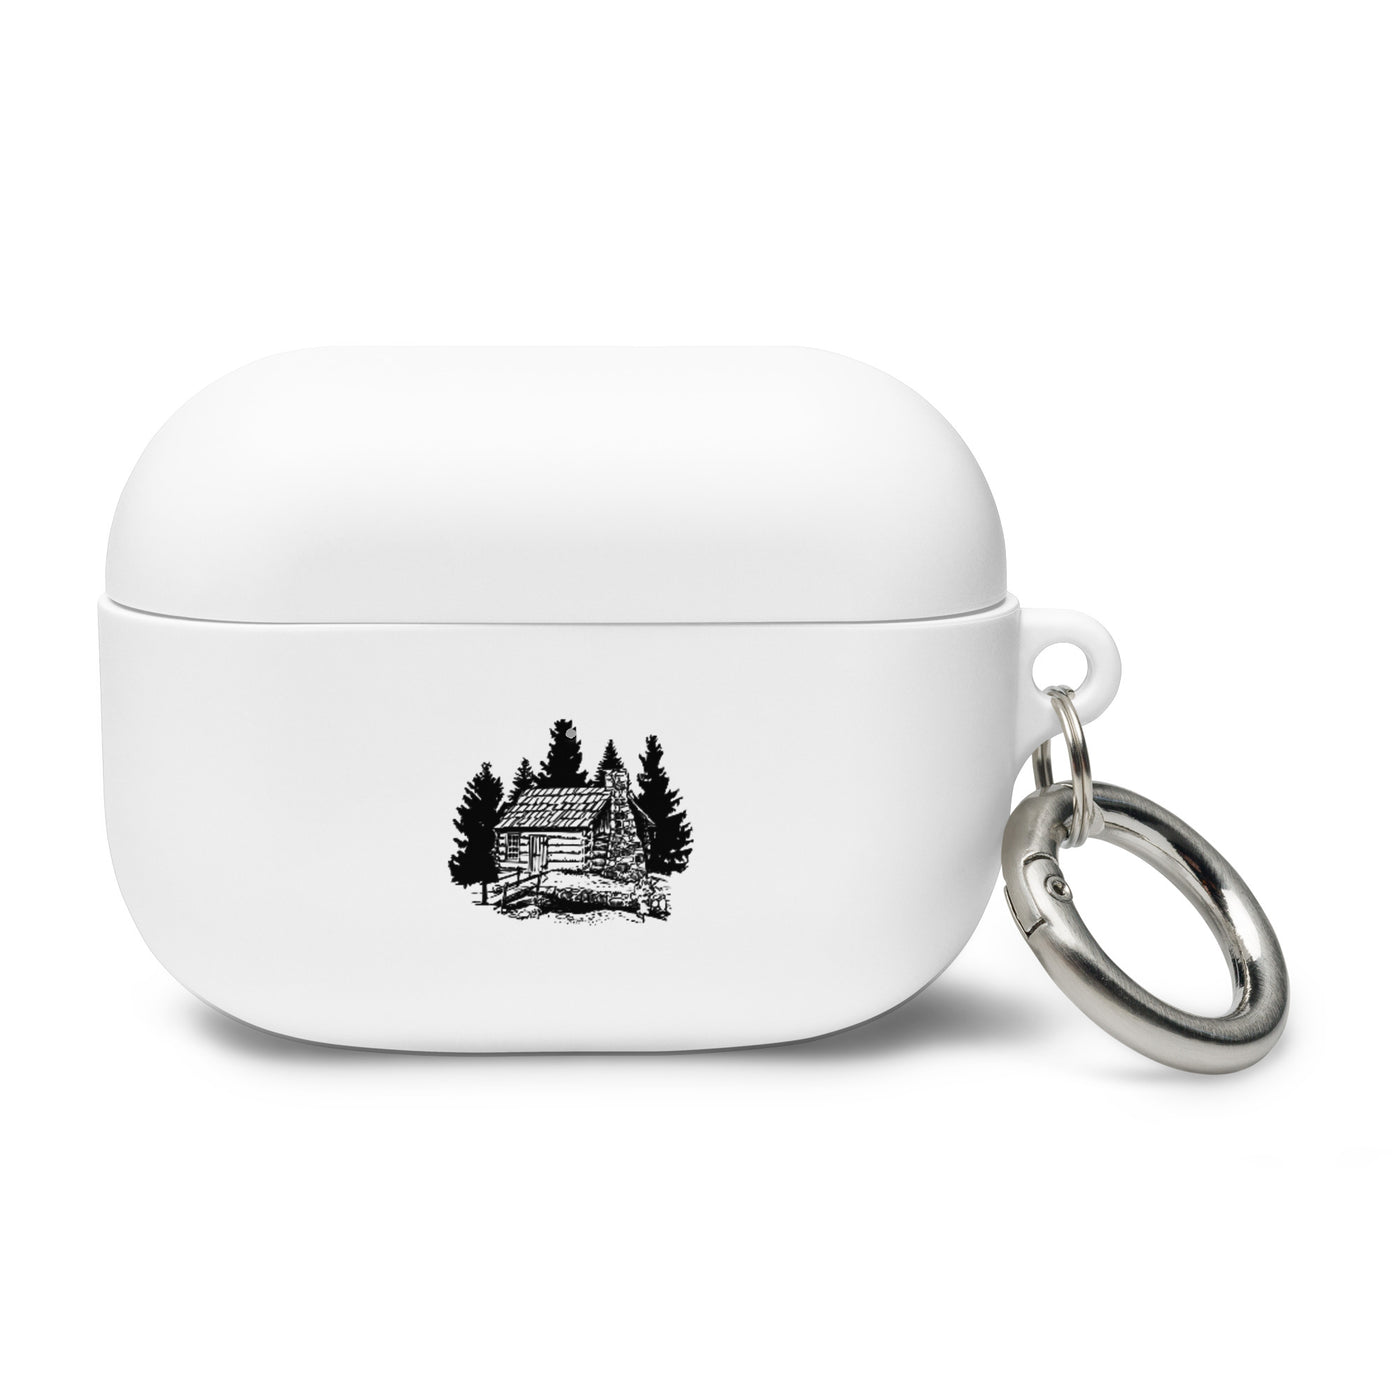 Camping - AirPods Case camping Weiß AirPods Pro